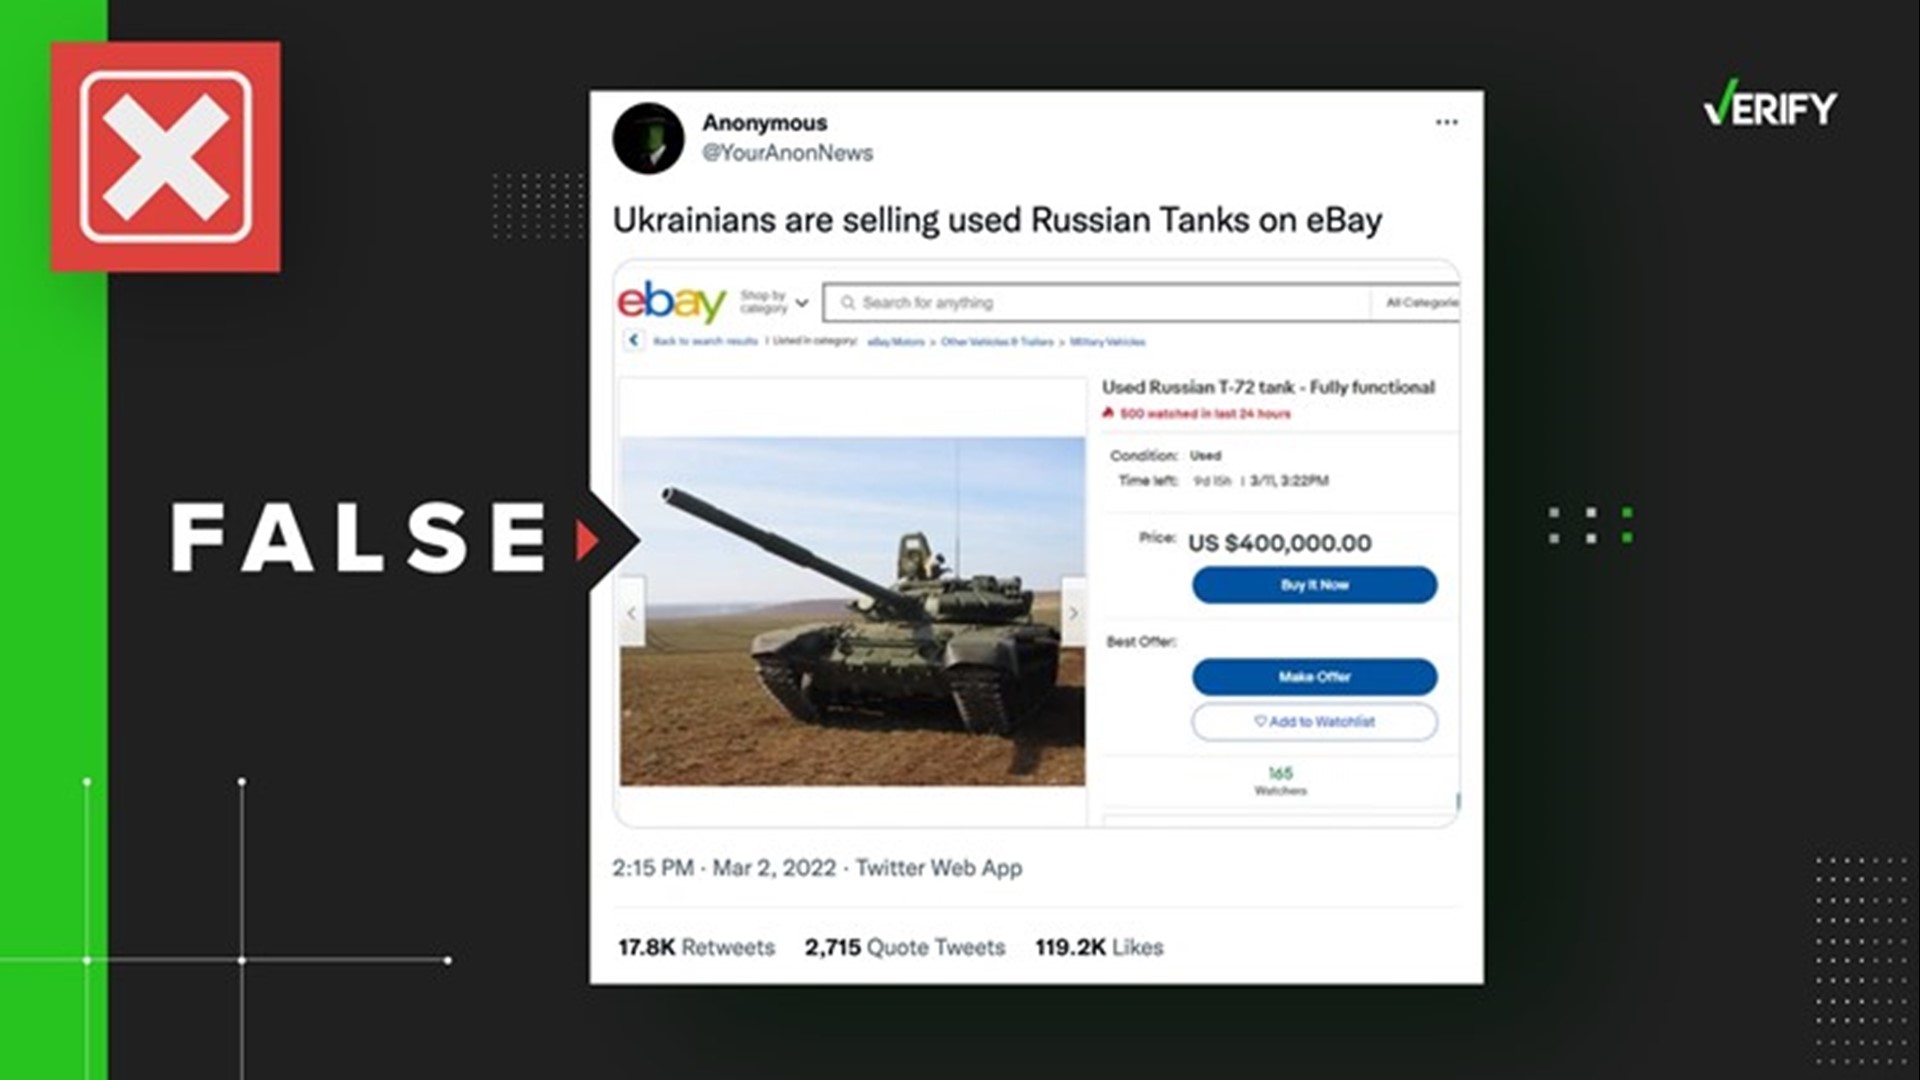 Viral posts shared across social media claim Ukrainians are selling used Russian tanks on eBay. VERIFY found no evidence this is true.